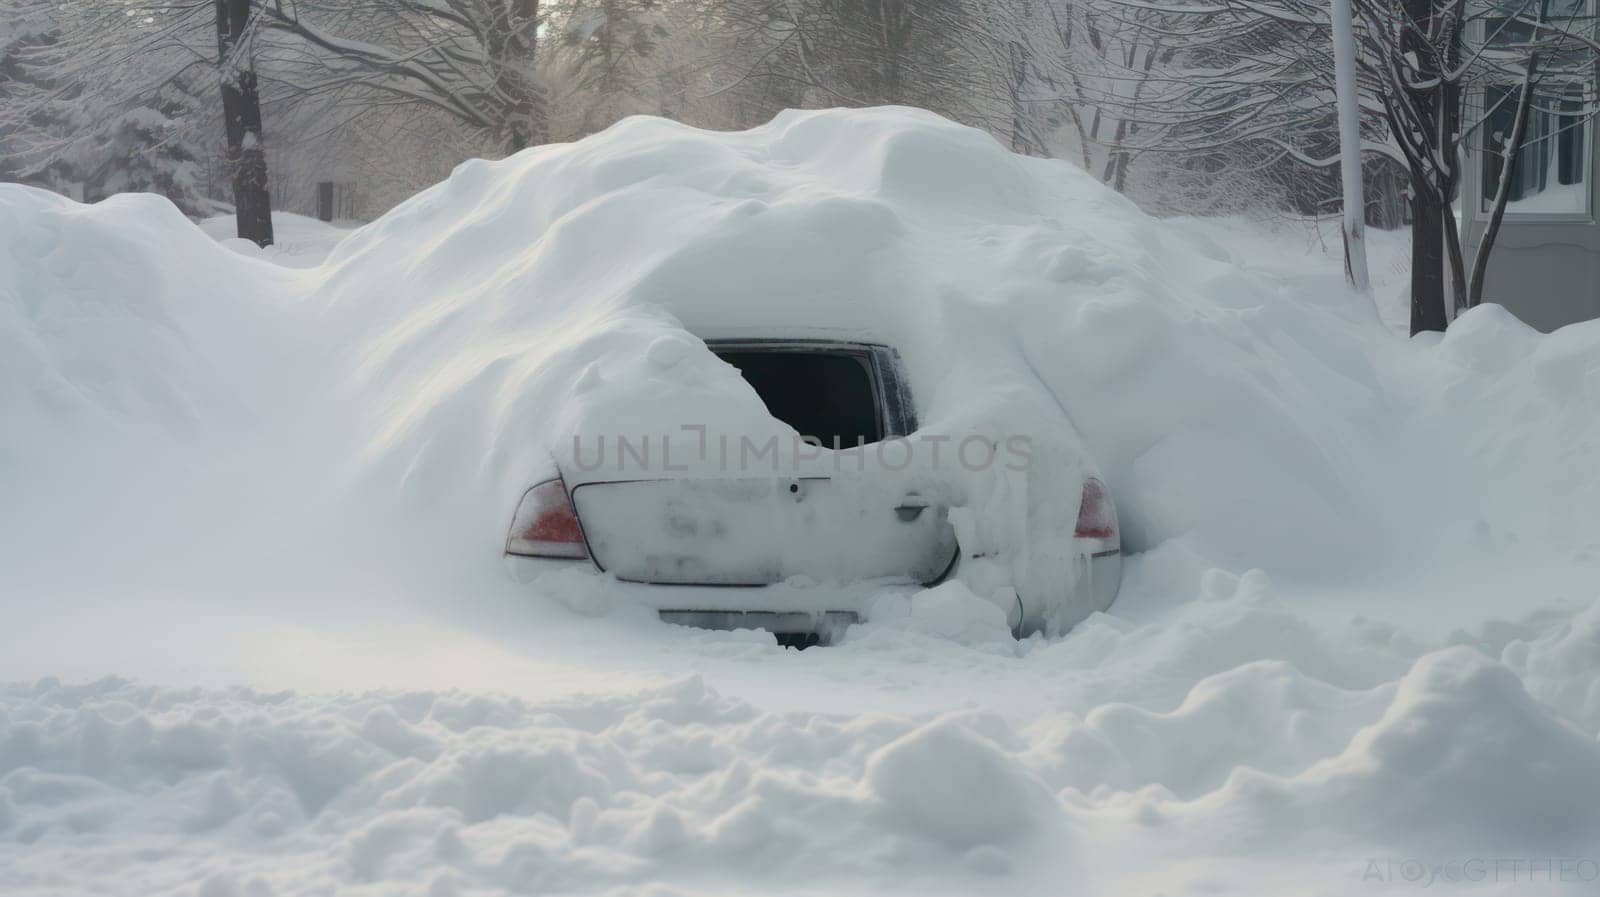 Snow-covered car trapped in a snowy blizzard.